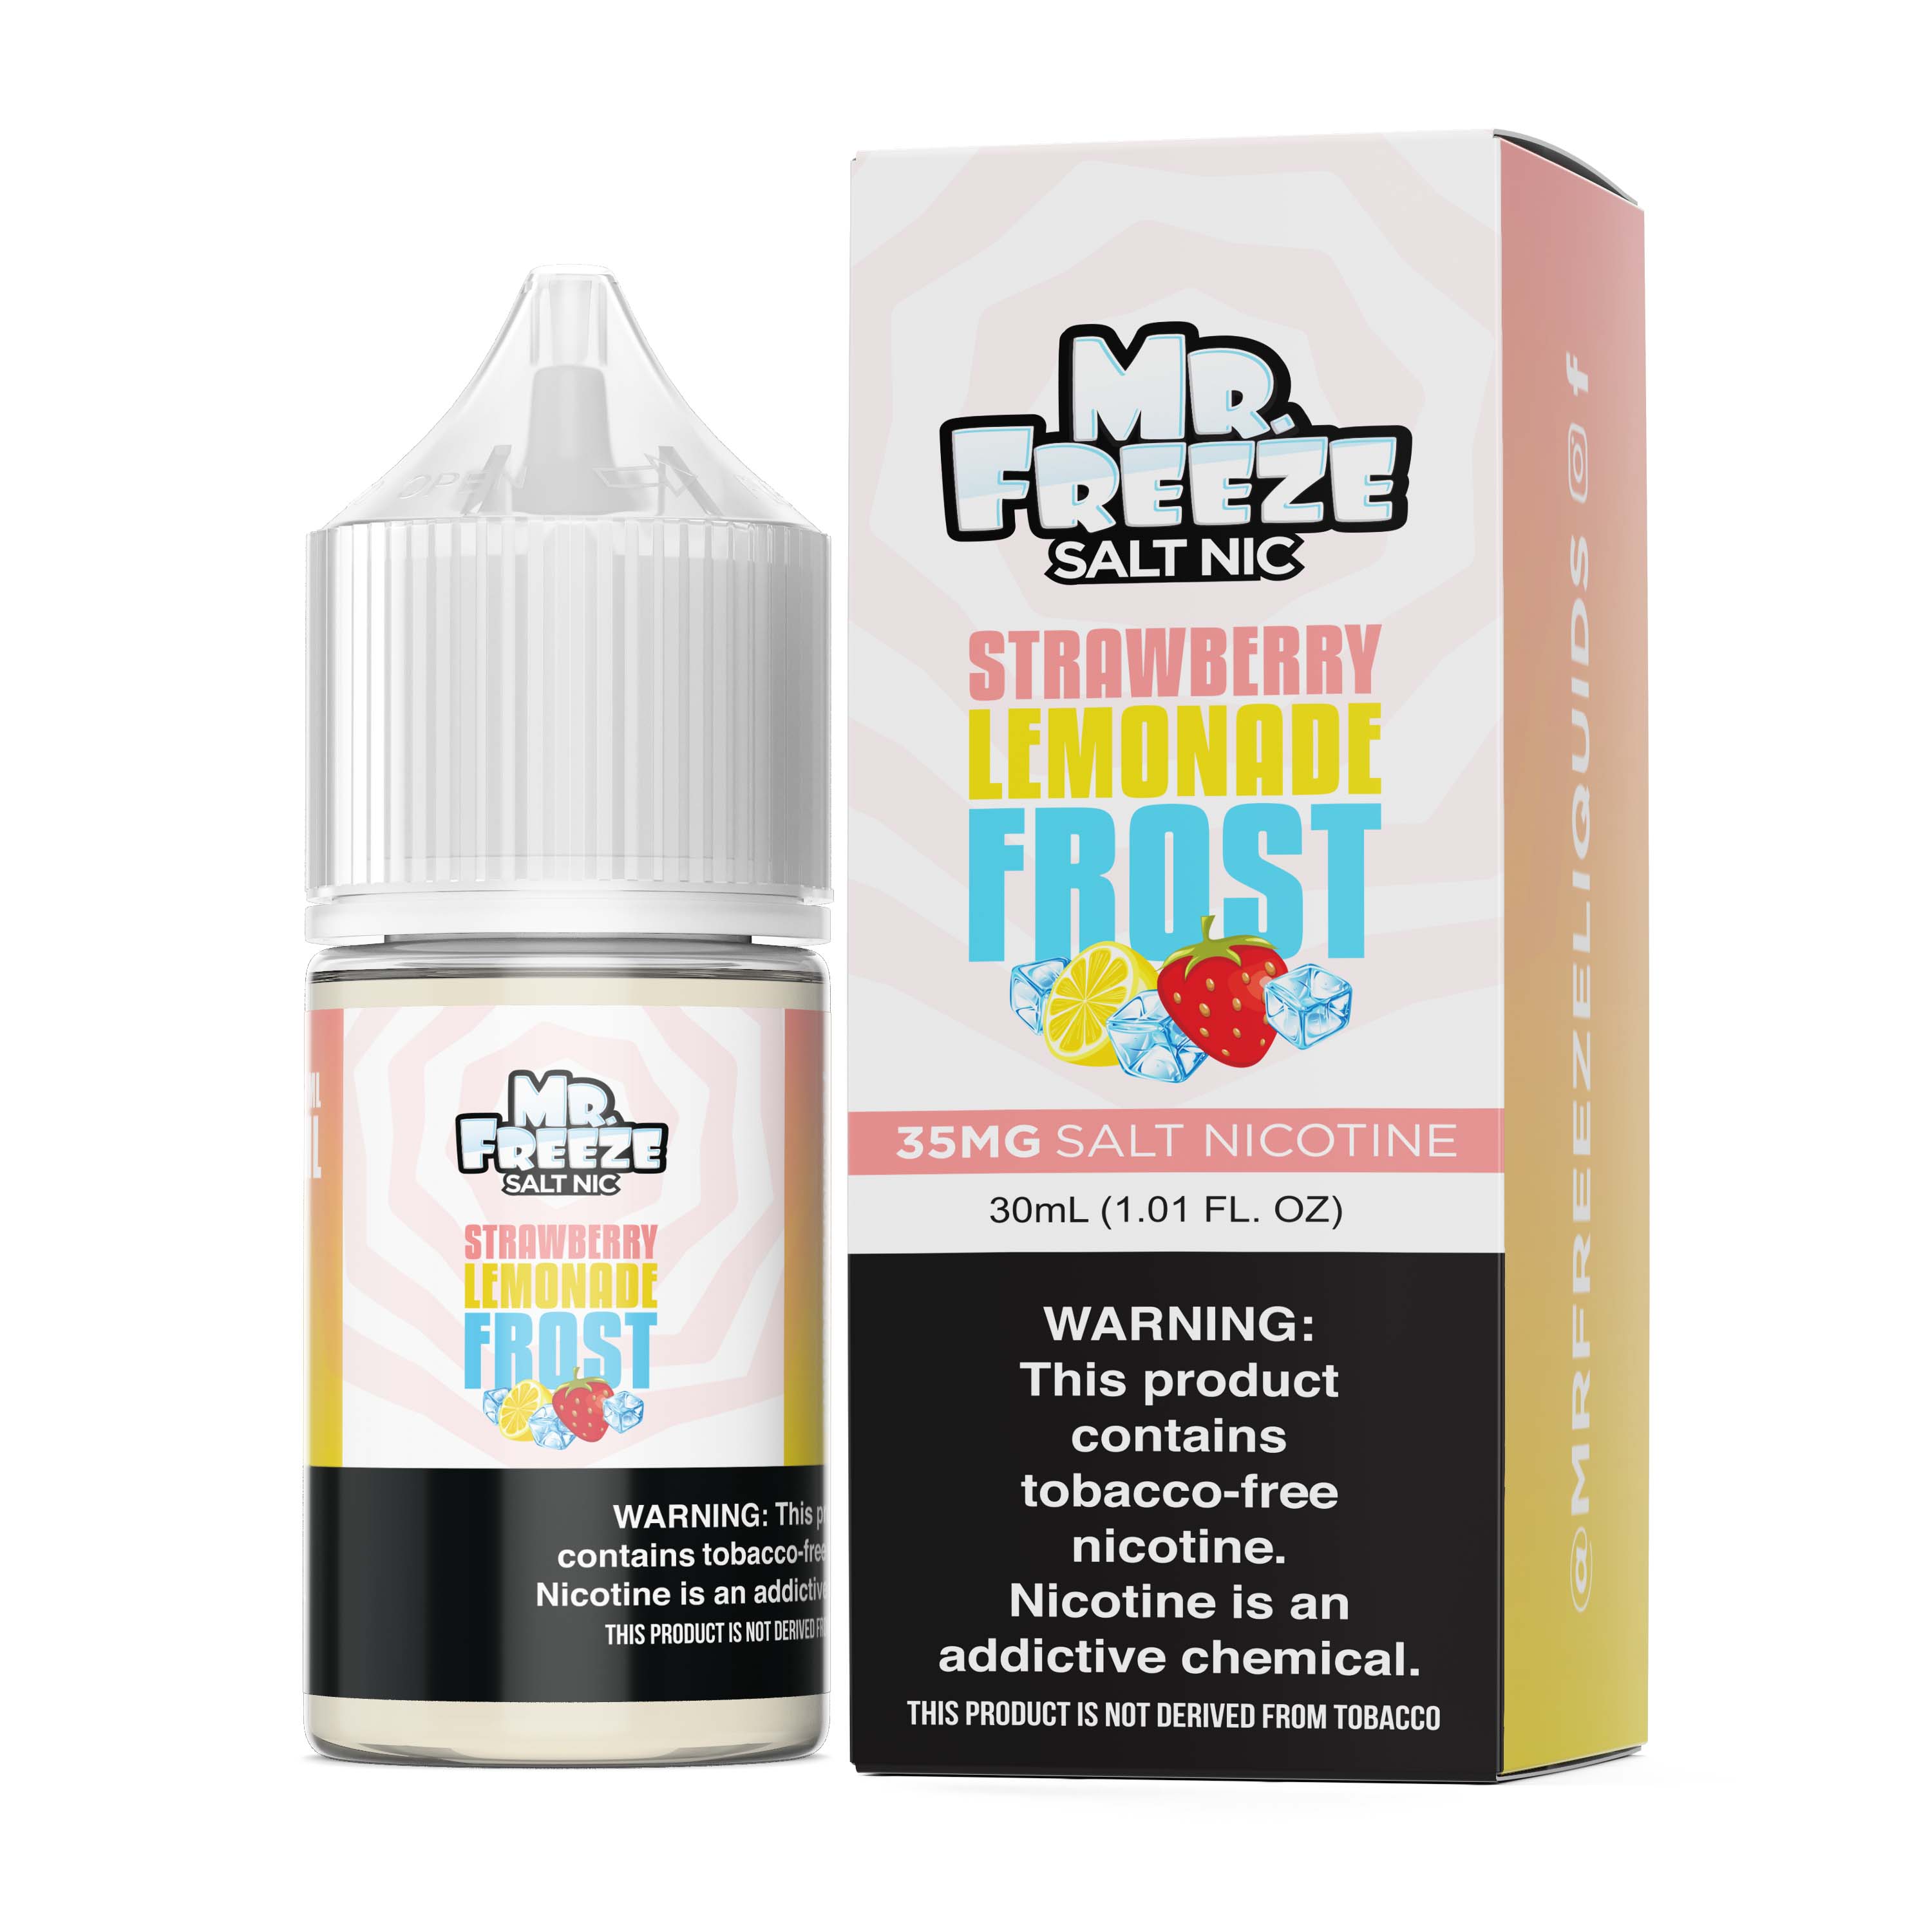 Strawberry Lemonade Frost by Mr. Freeze Tobacco-Free Nicotine Salt Series 30mL with Packaging